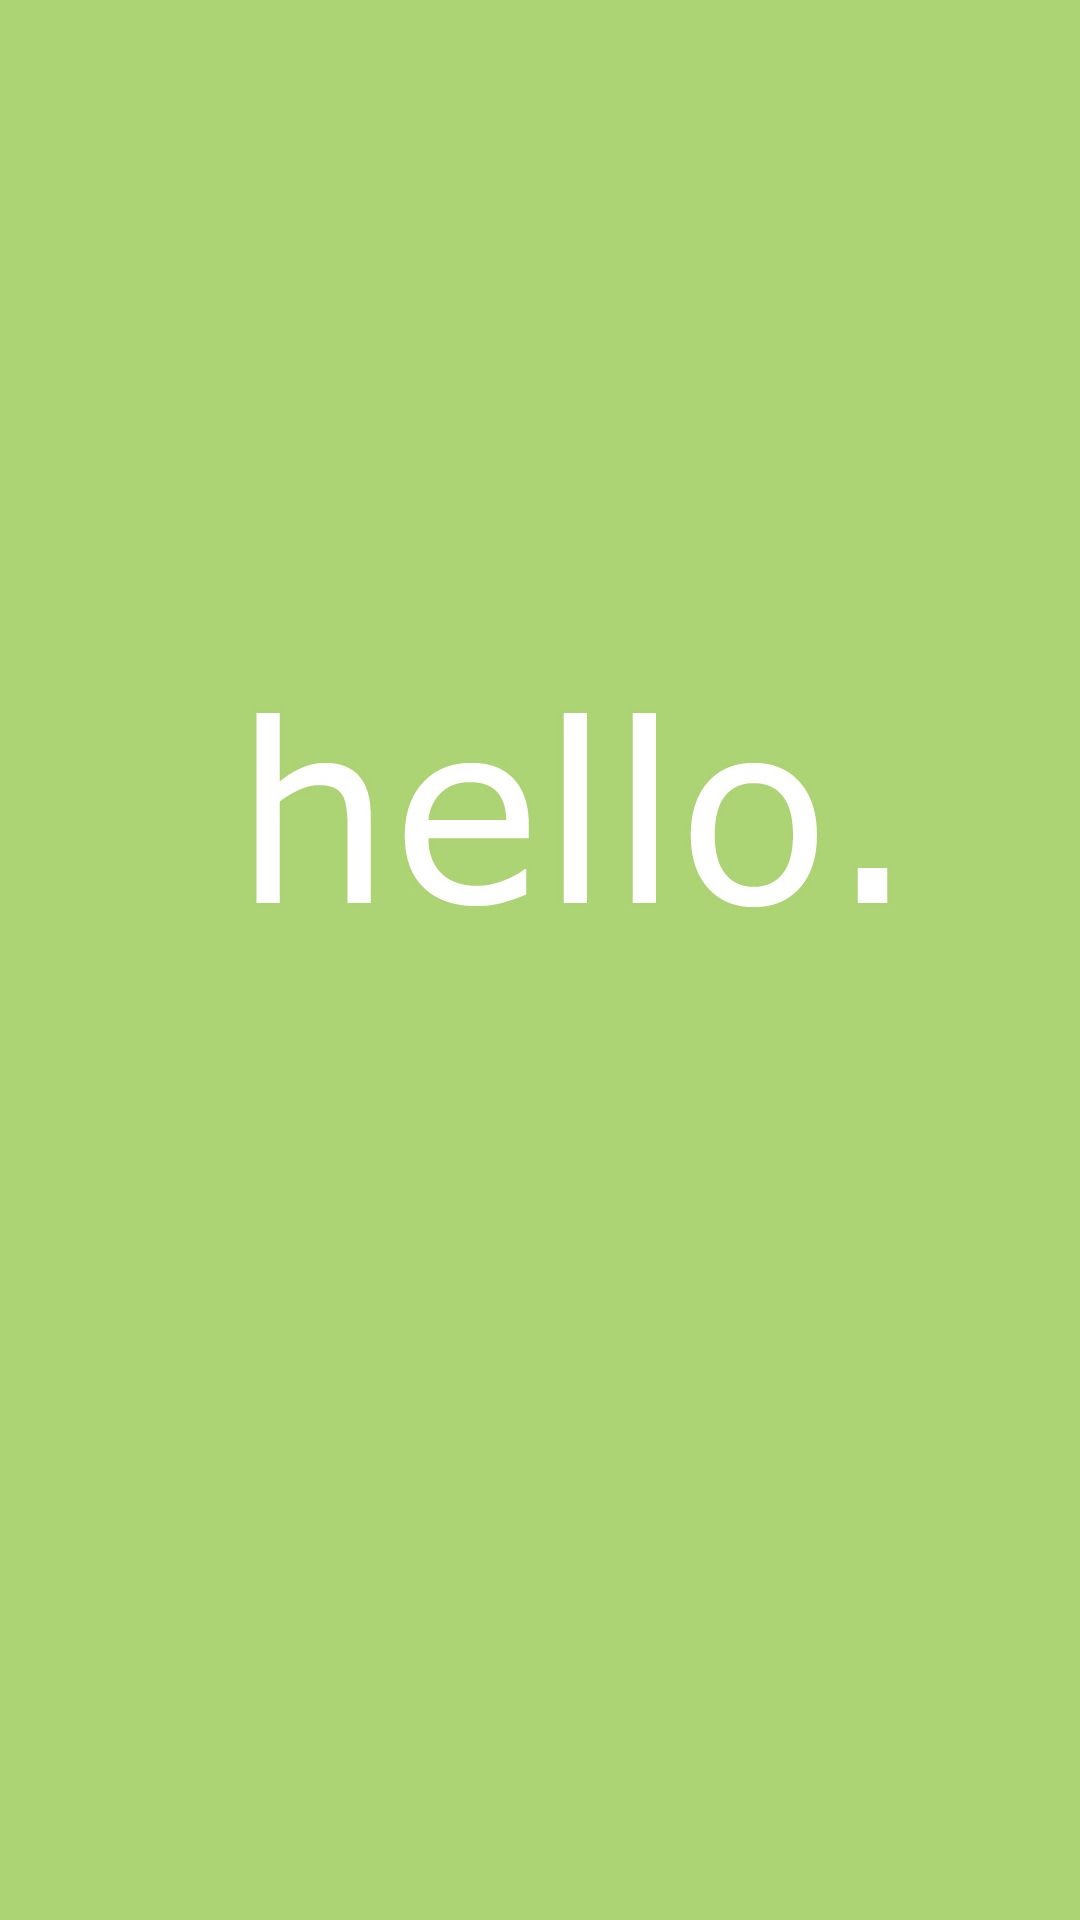 Cute Simple Hello Message Android Wallpaper free download